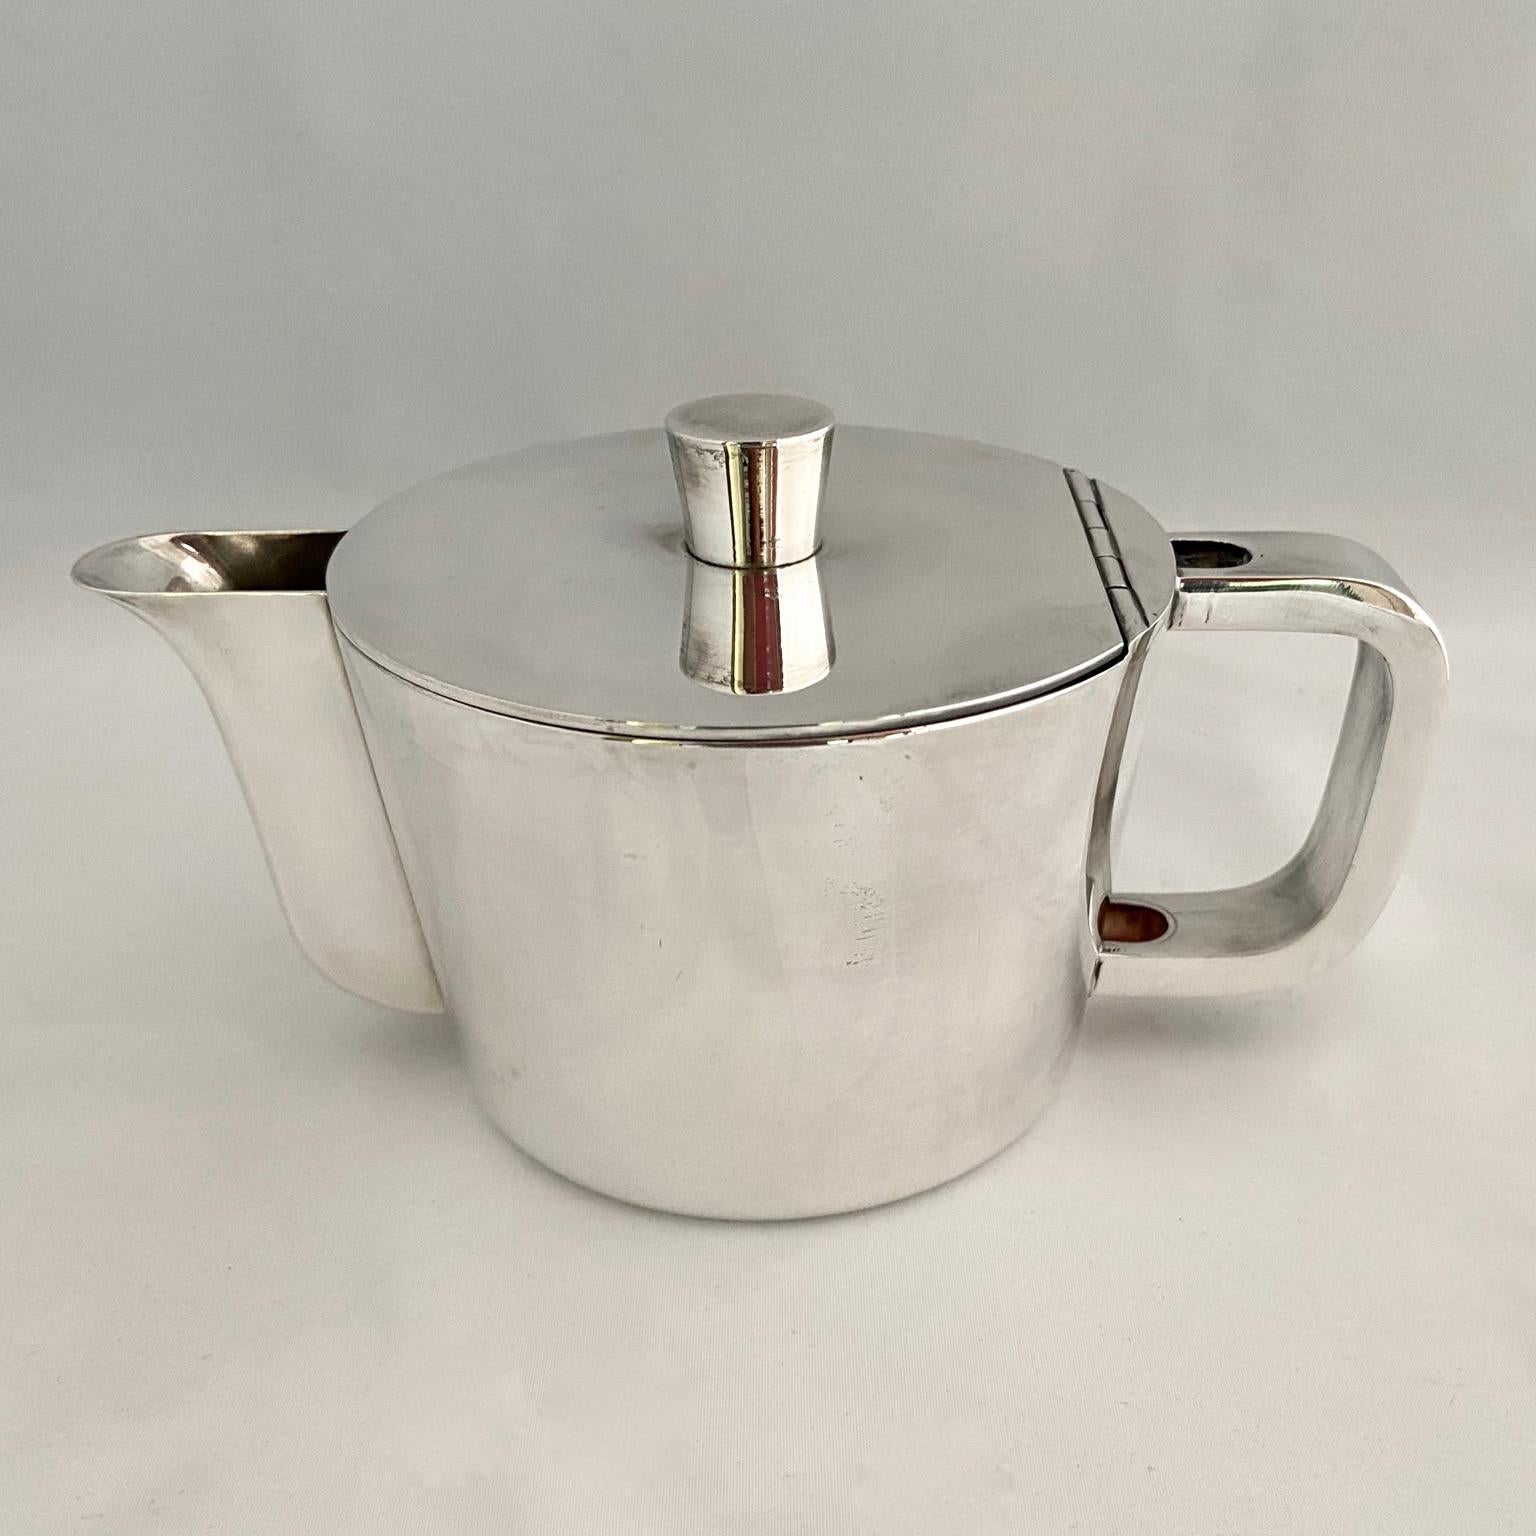 Silvered Extensive Silver Plated Gio Ponti Coffee and Tea Set on a Tray, for Arthur Krupp